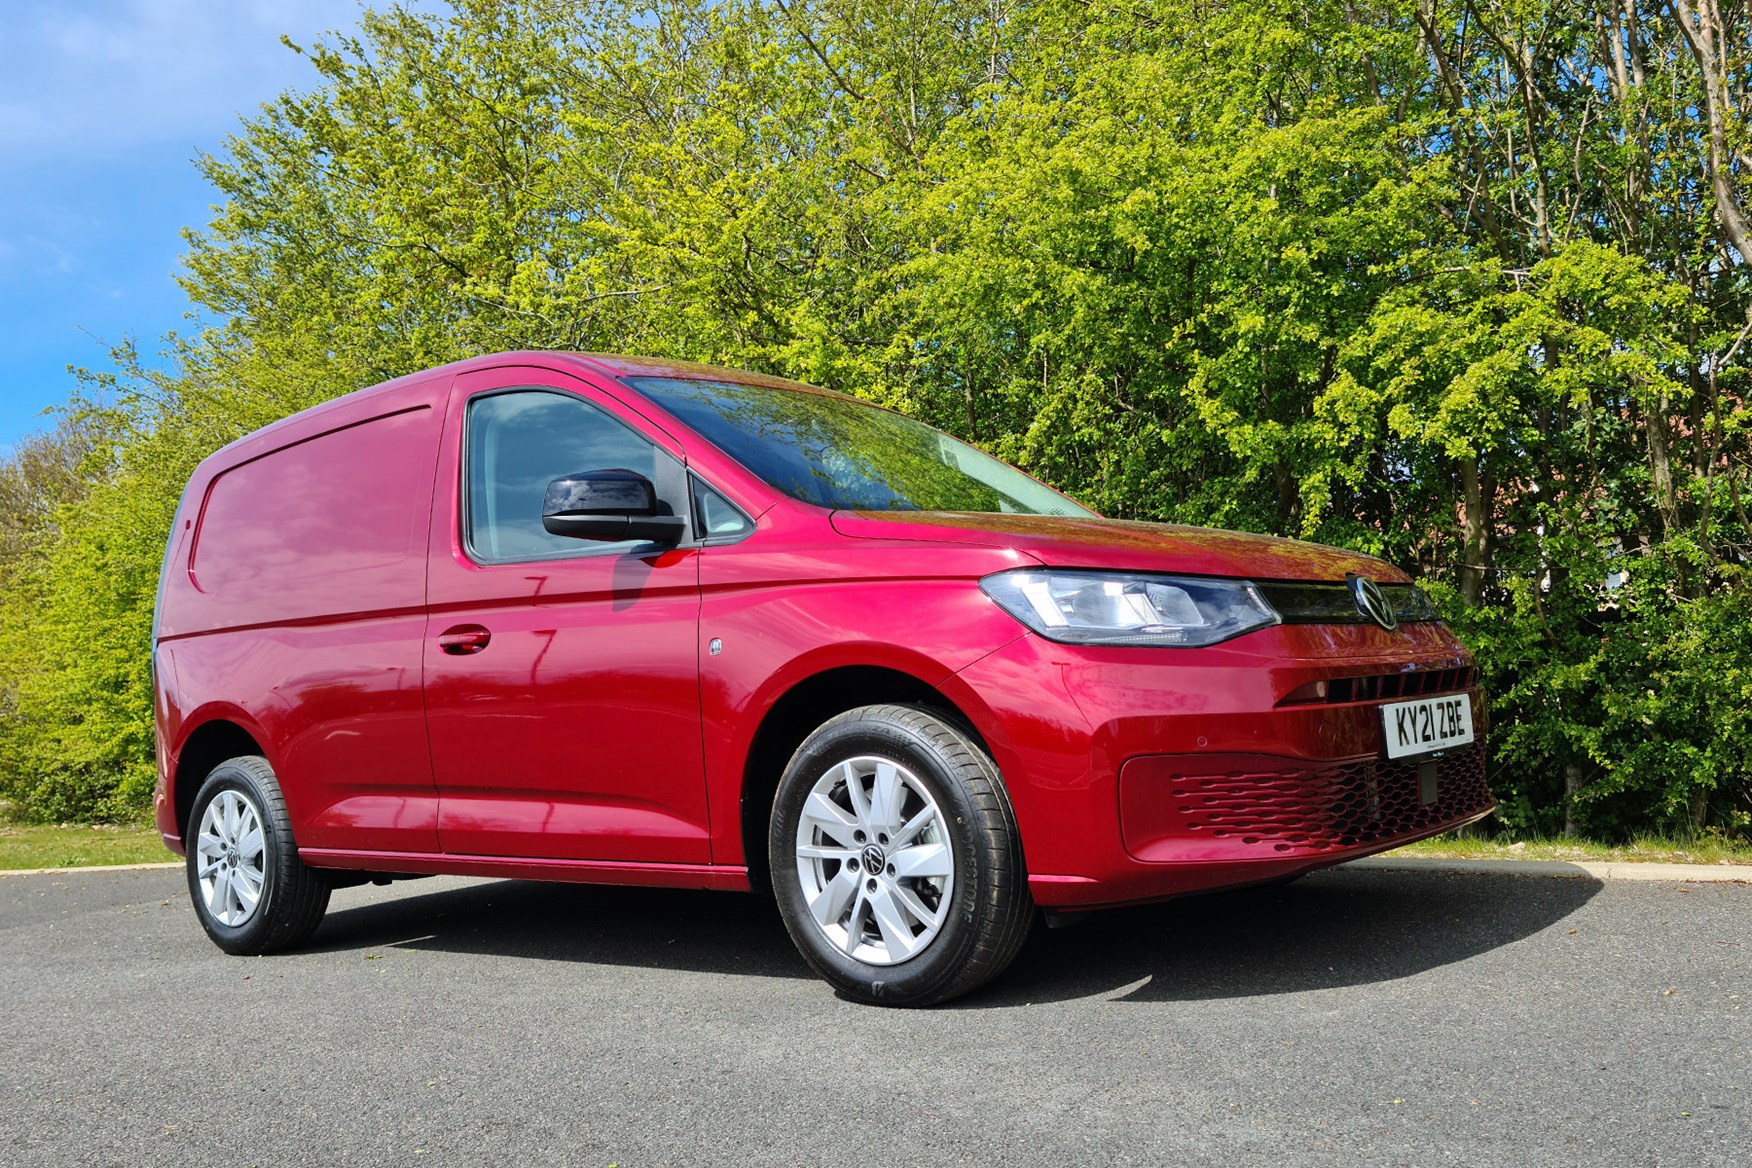 Volkswagen Caddy Cargo 1.5 TSI petrol review - front view, red, low